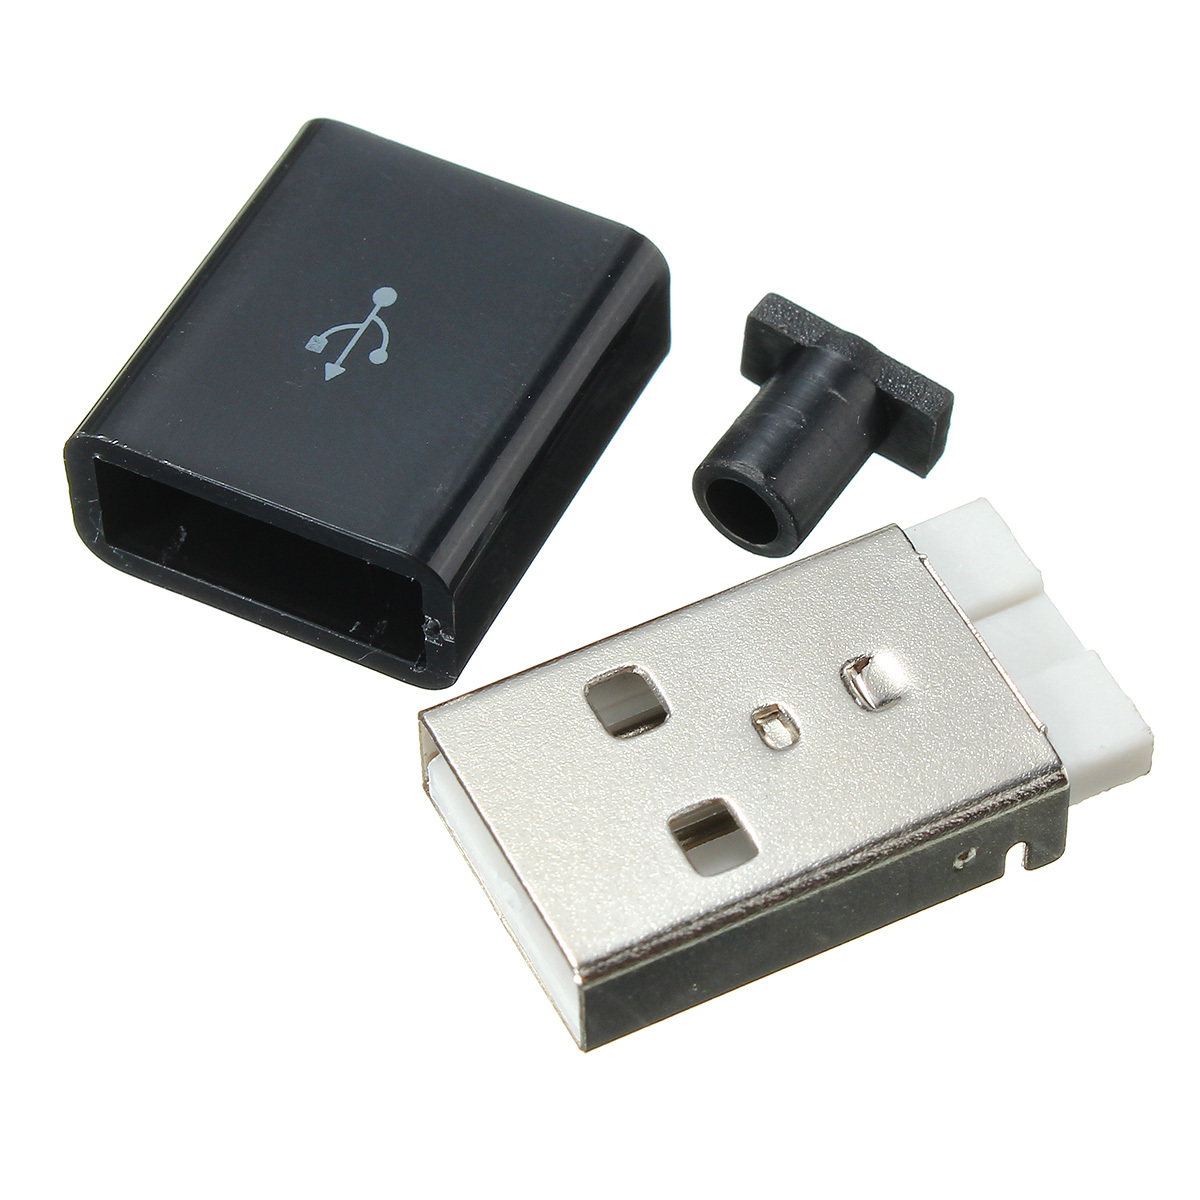 1Pcs USB 2.0 Type A Plug 4-pin Male Adapter Solder Connector & Black Cover Square 2